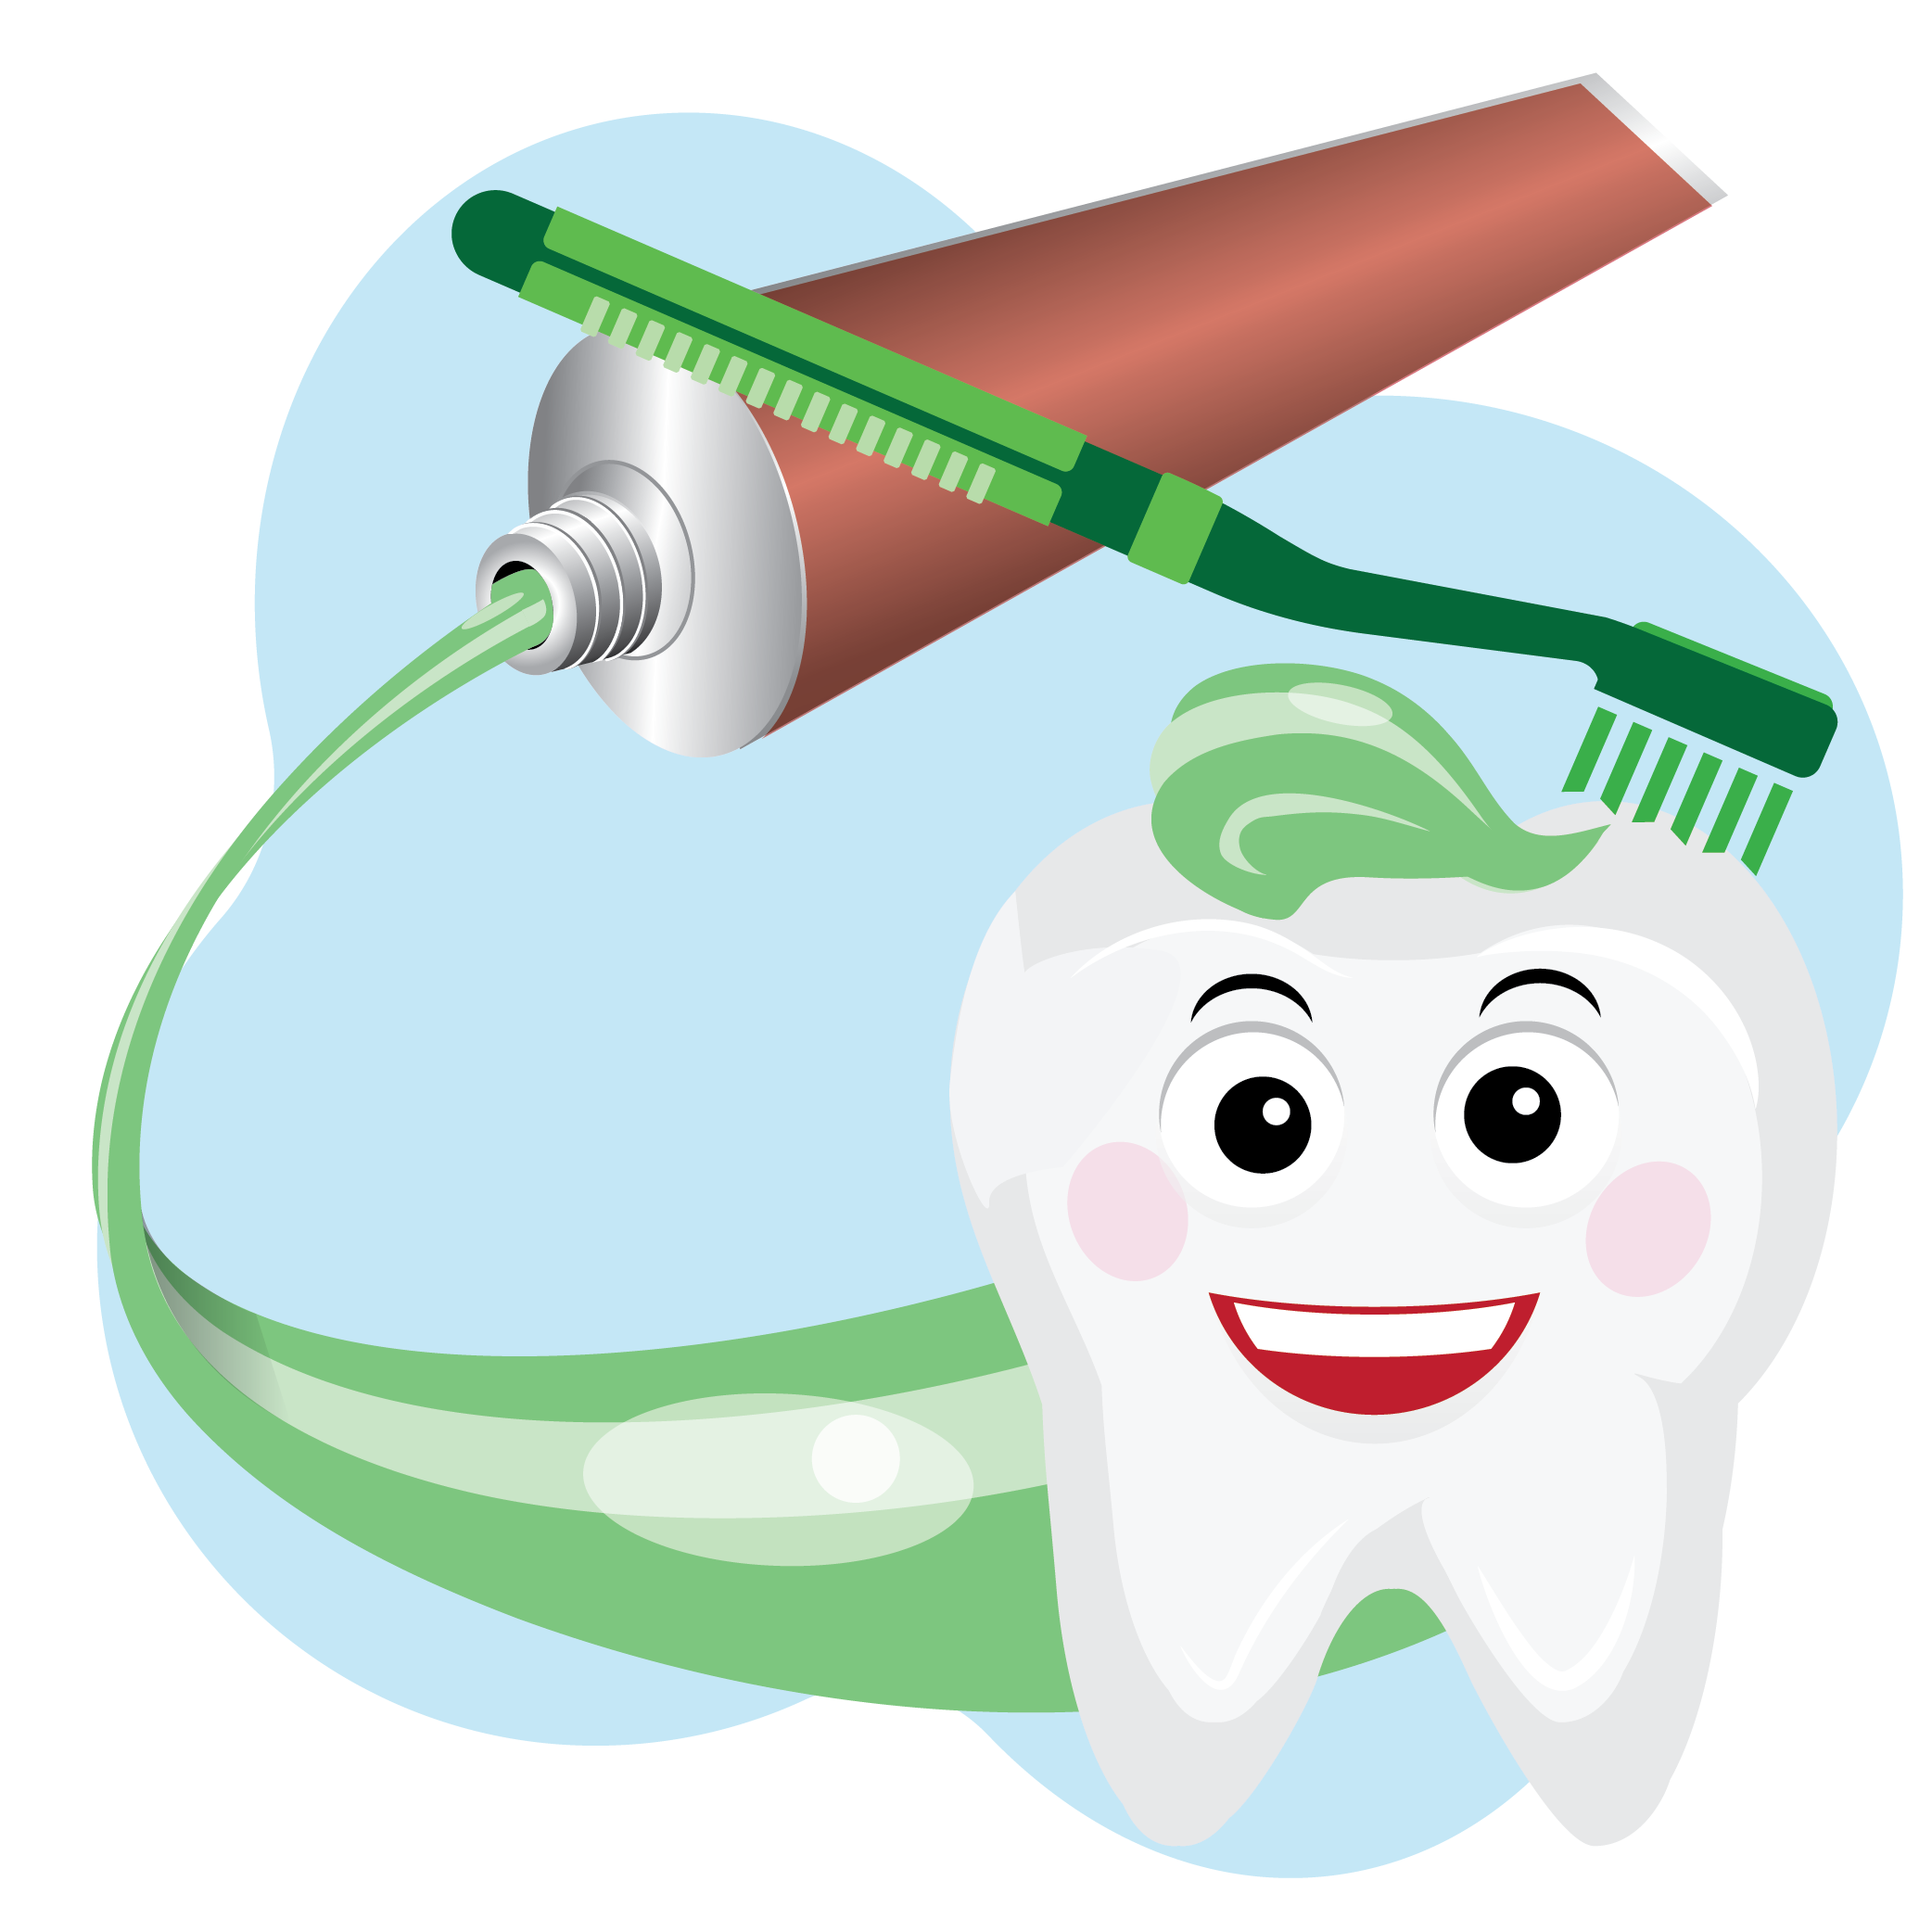 Illustration of tooth smiling while being brushed by toothbrush and surrounded by toothpaste